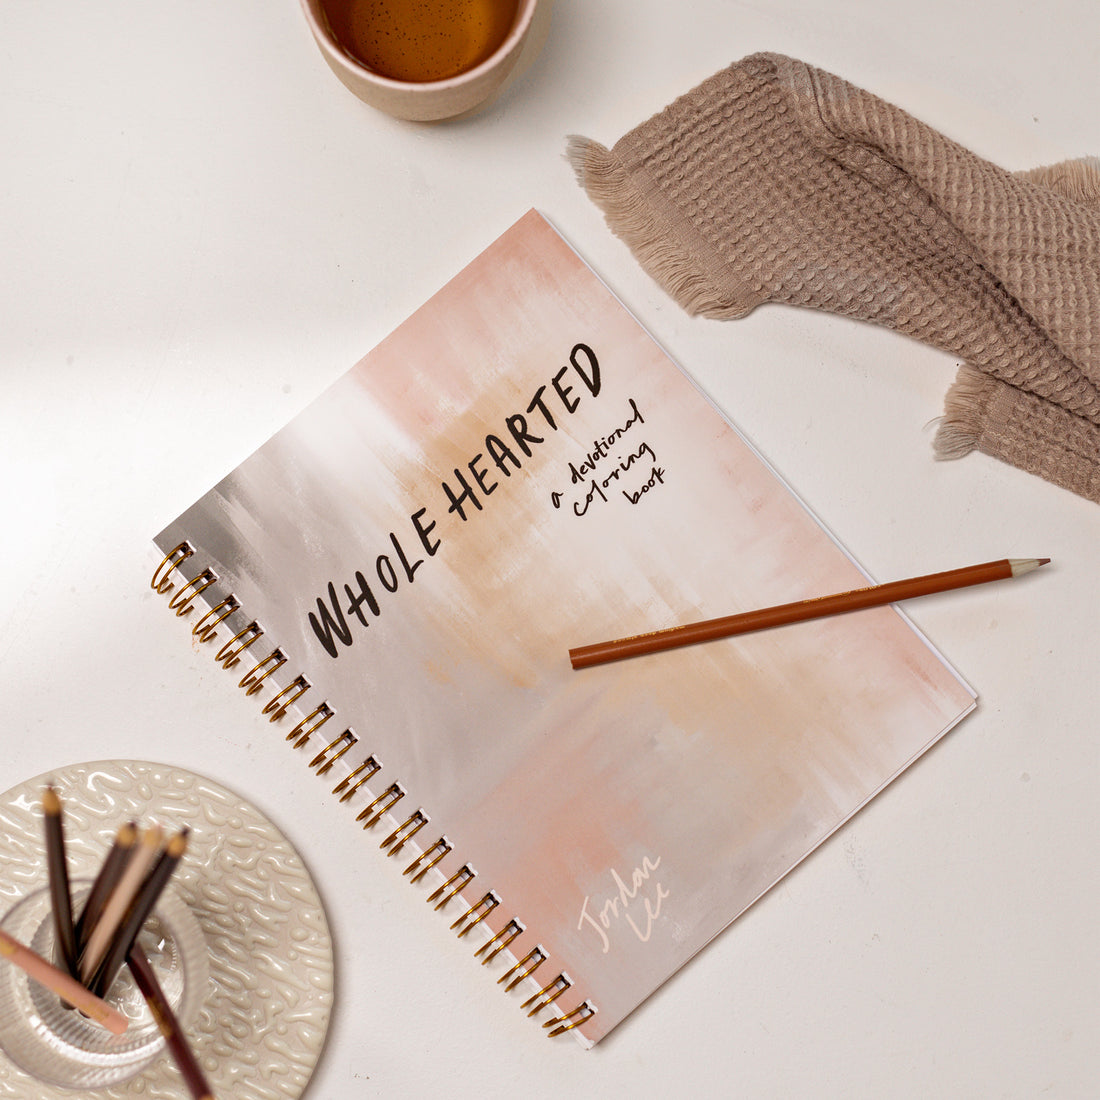 Wholehearted: A Coloring Book Devotional – Paige Tate and Co.